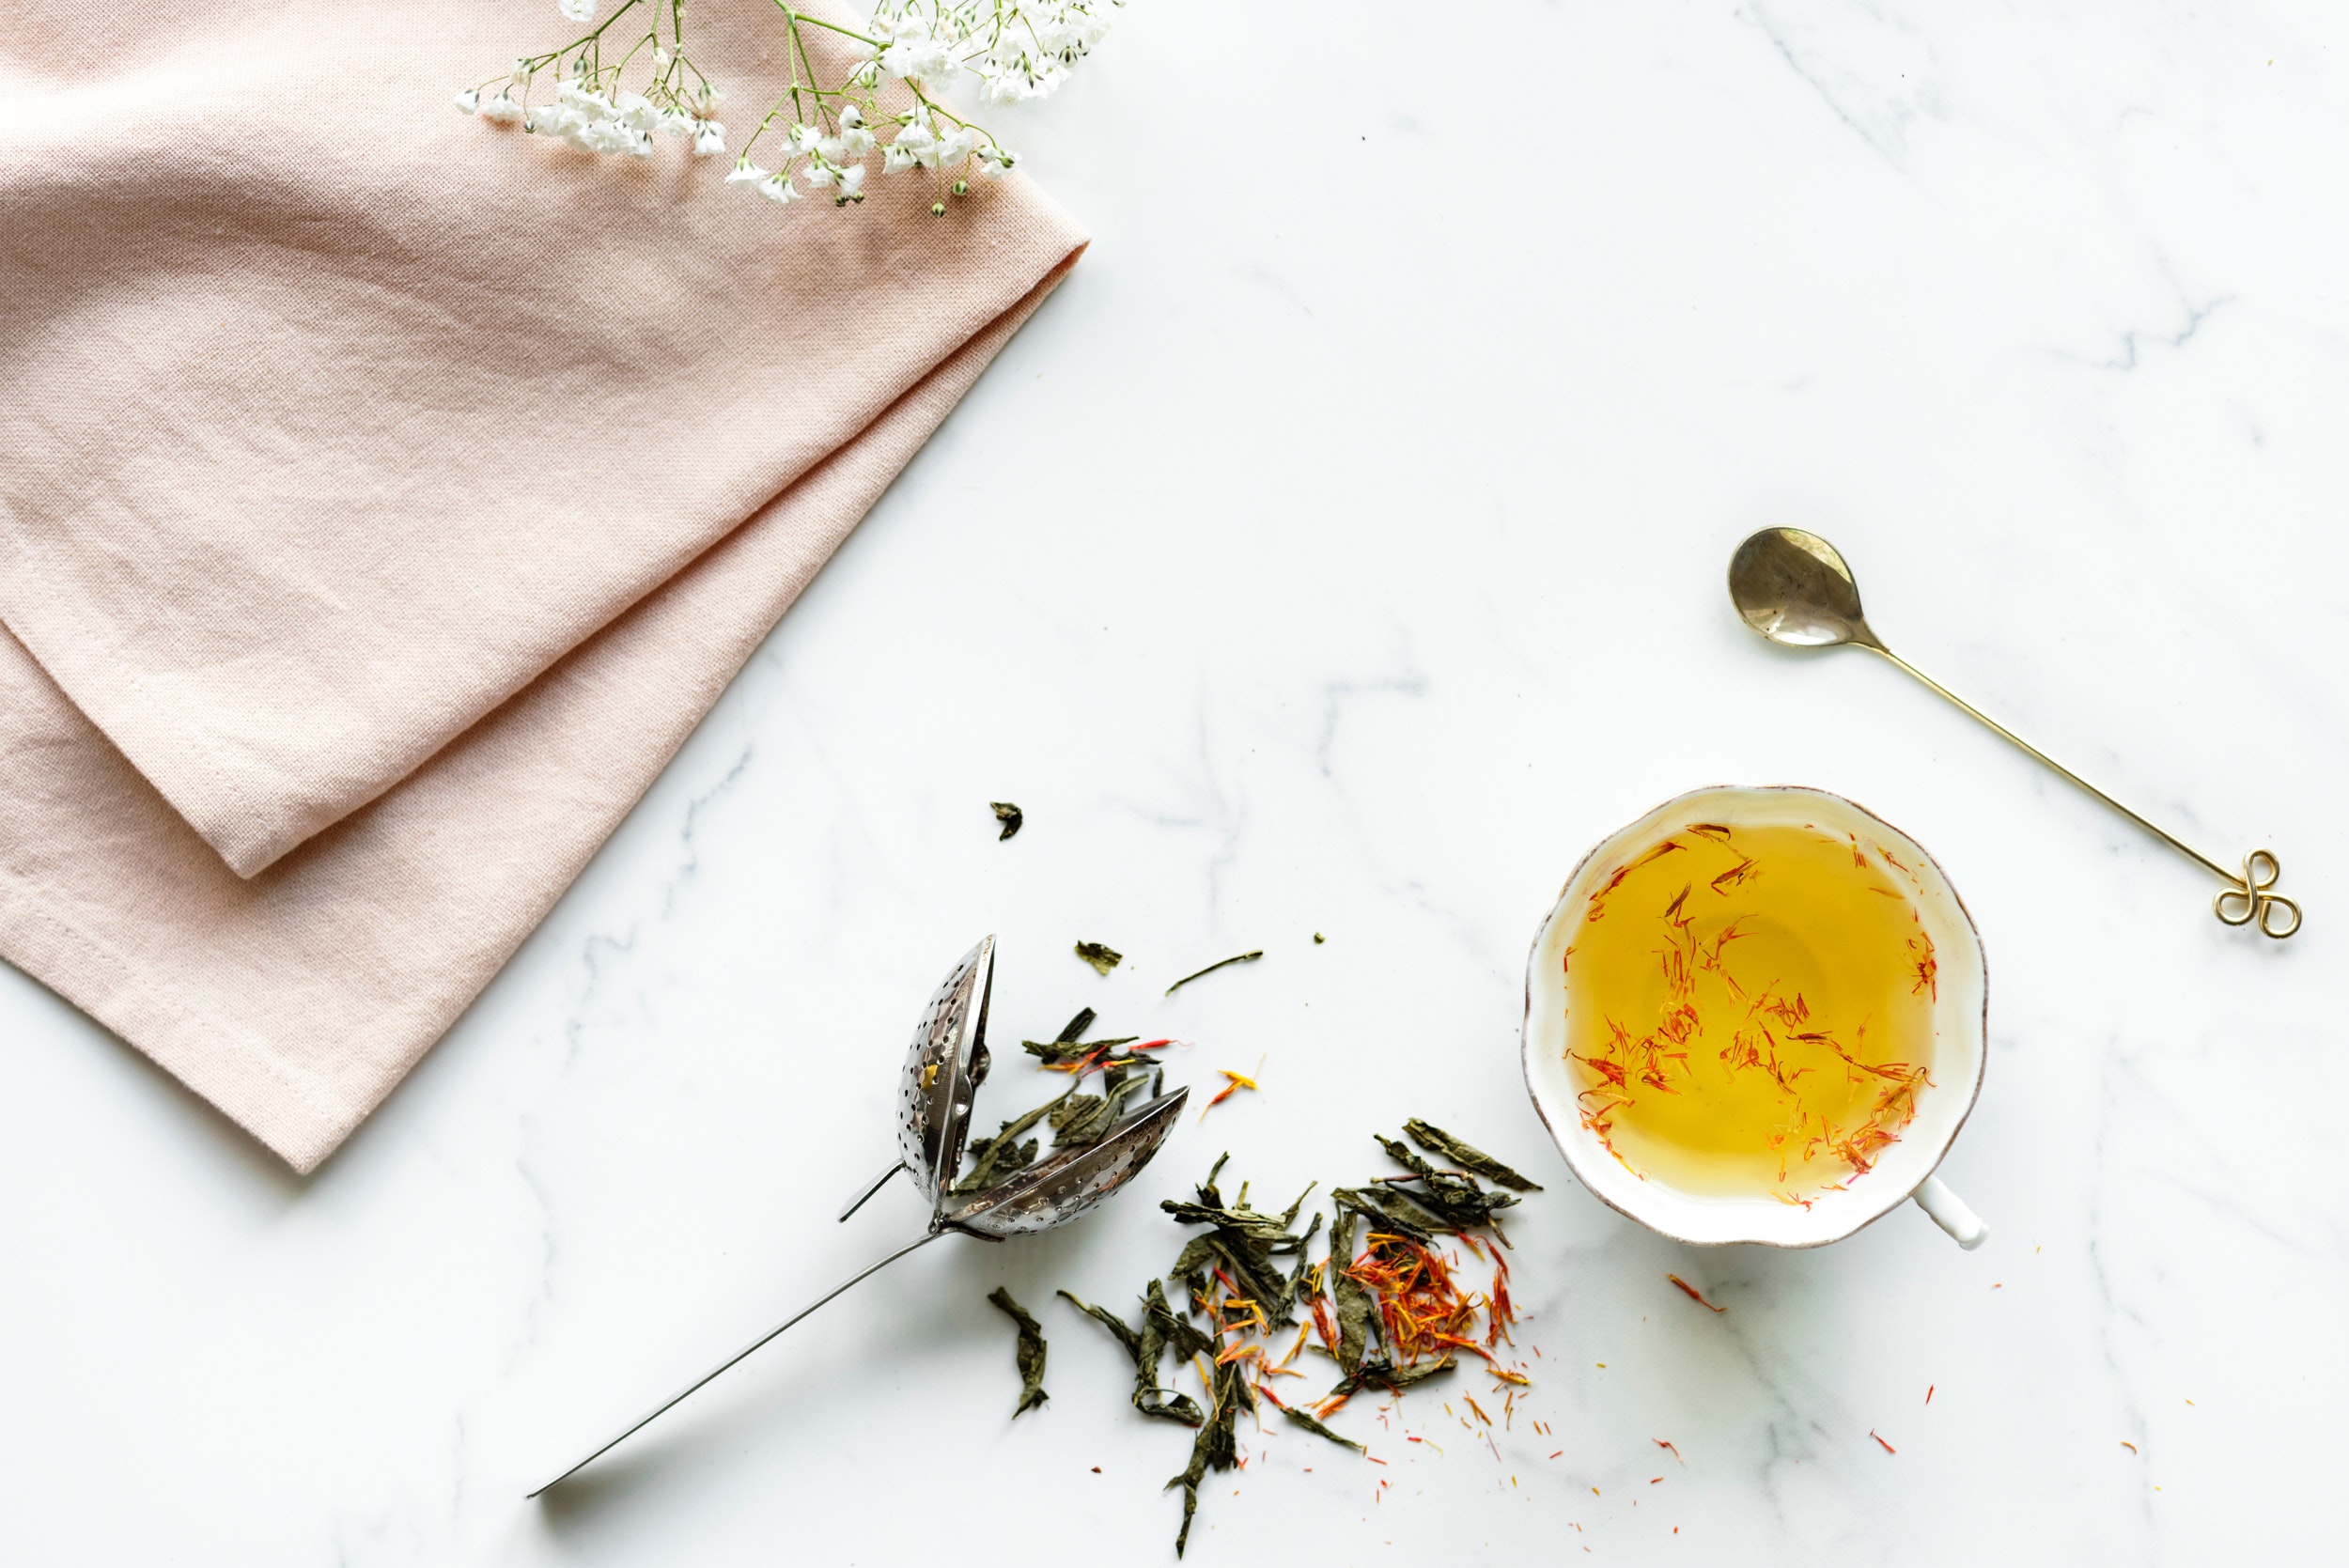 First-of-Its-Kind Tea Aroma Kit Launches